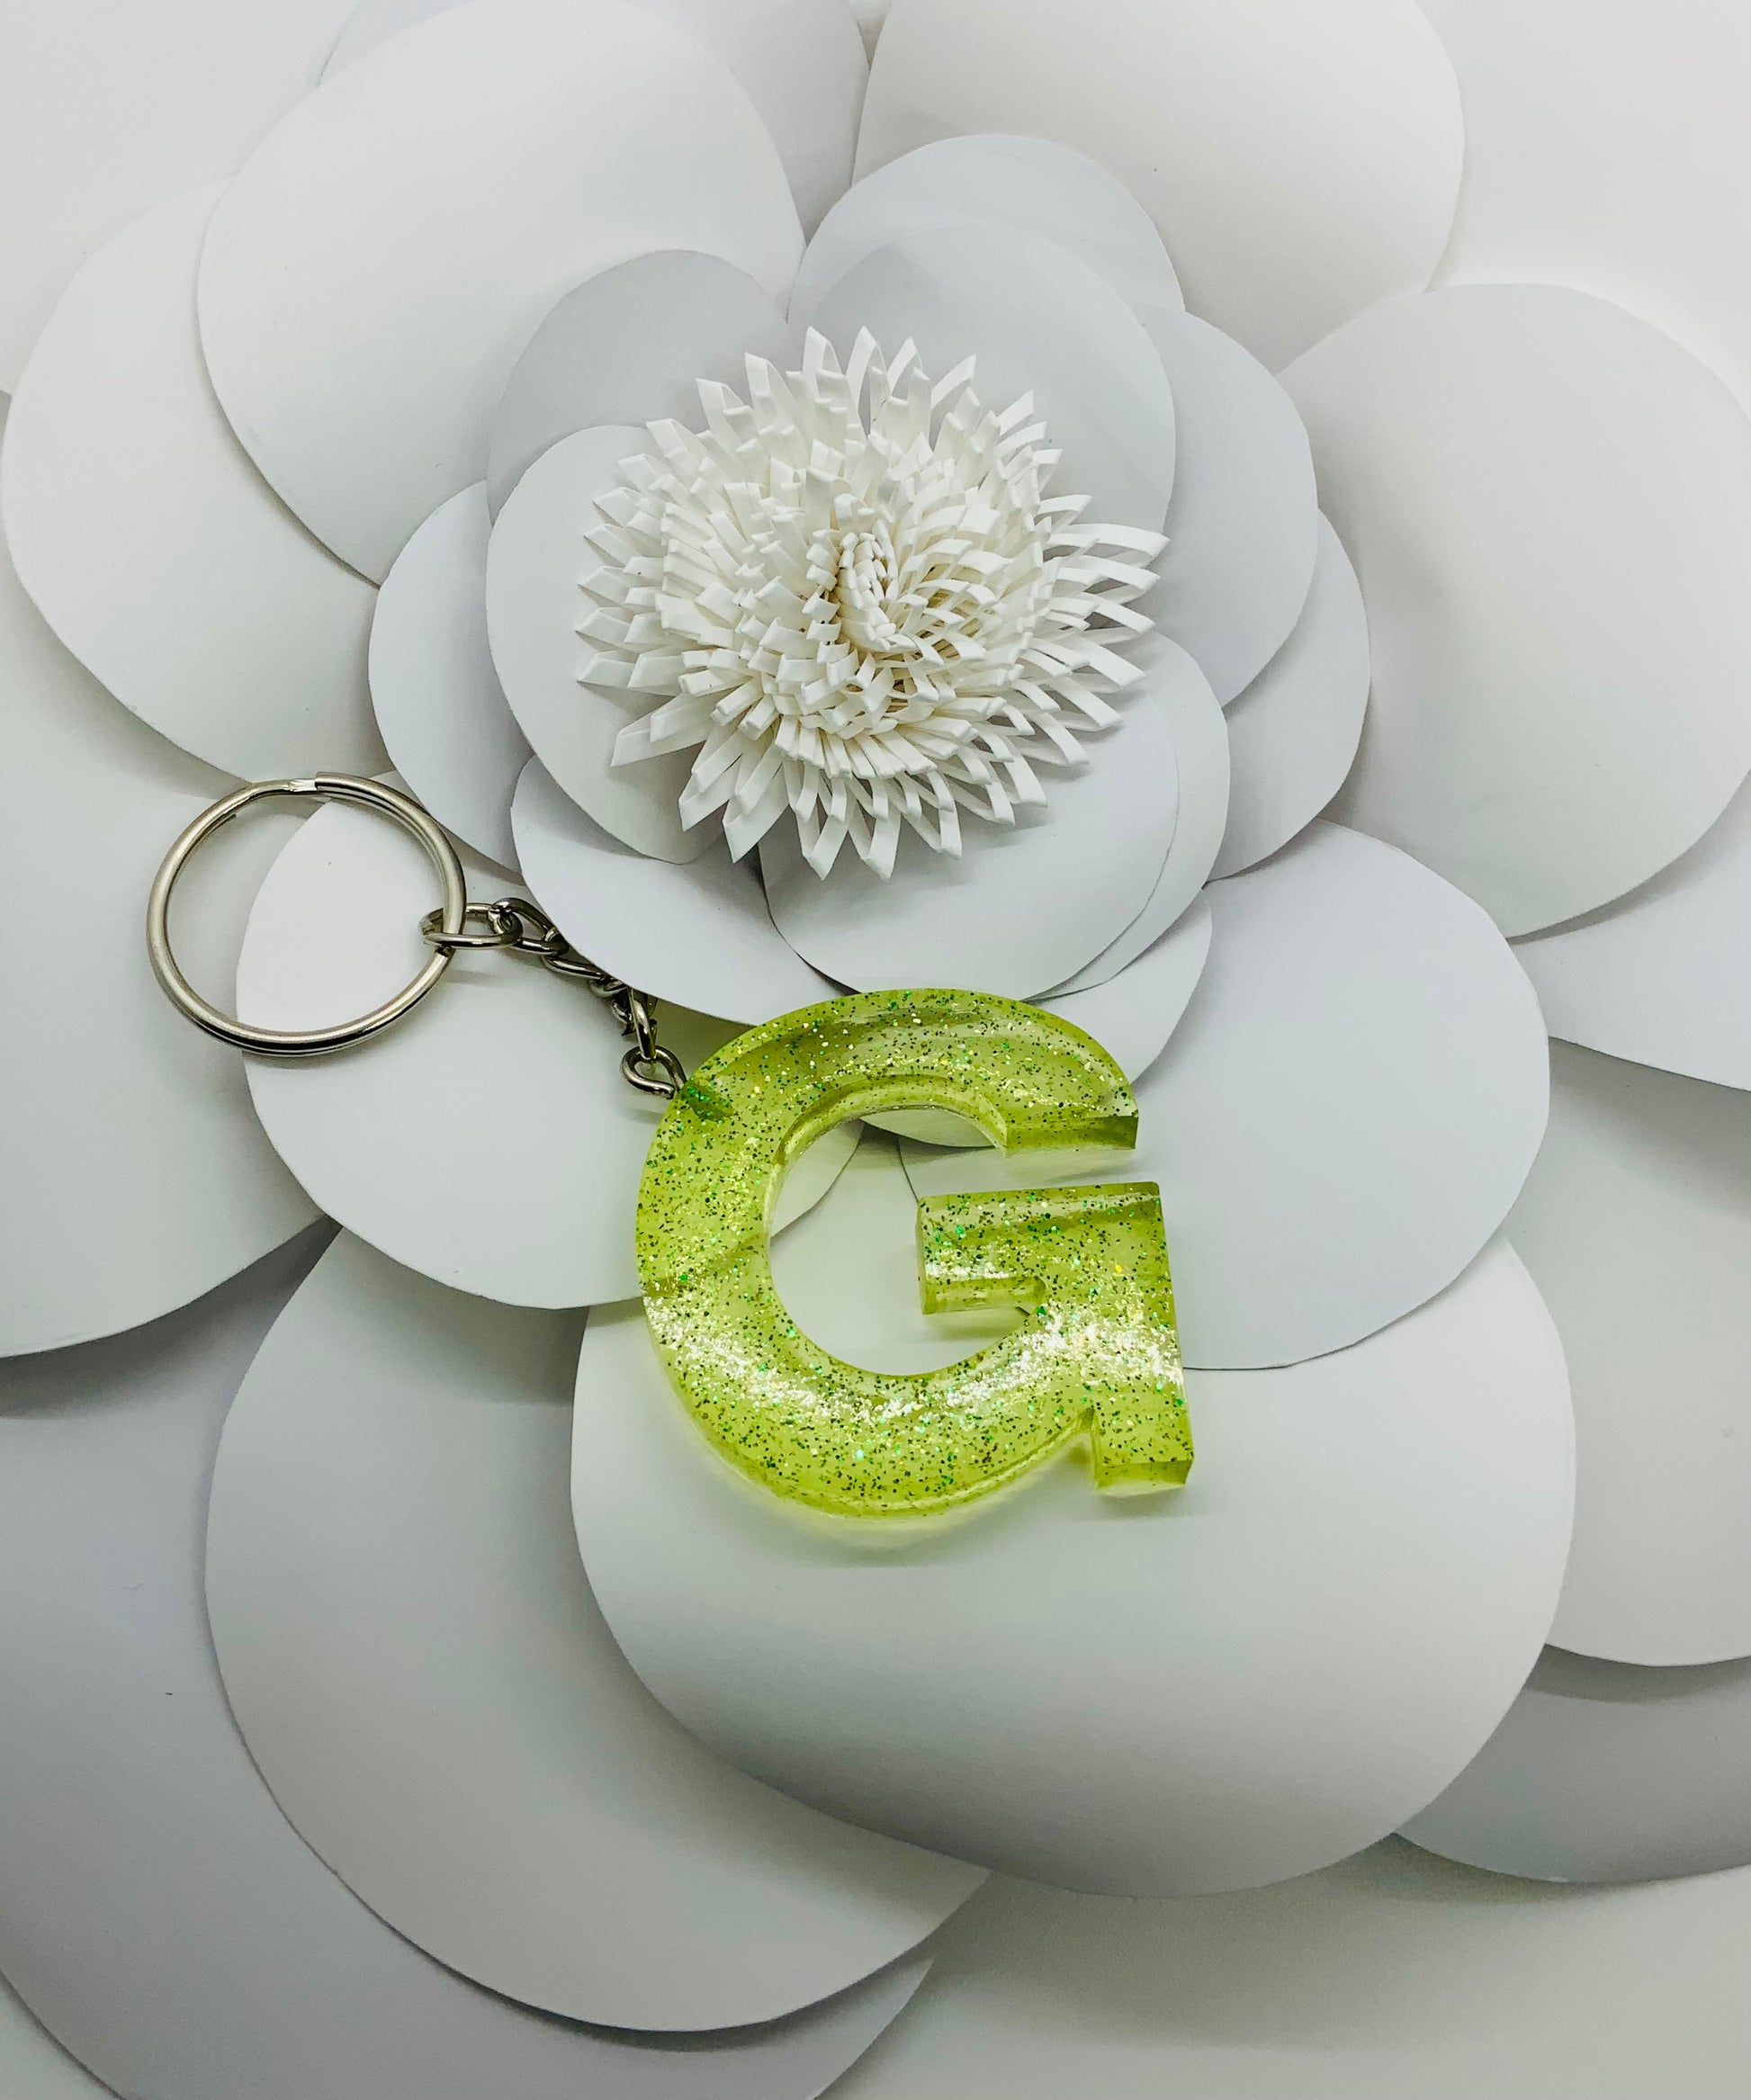 The Letter "G" Keychain - BeautiesbyHand